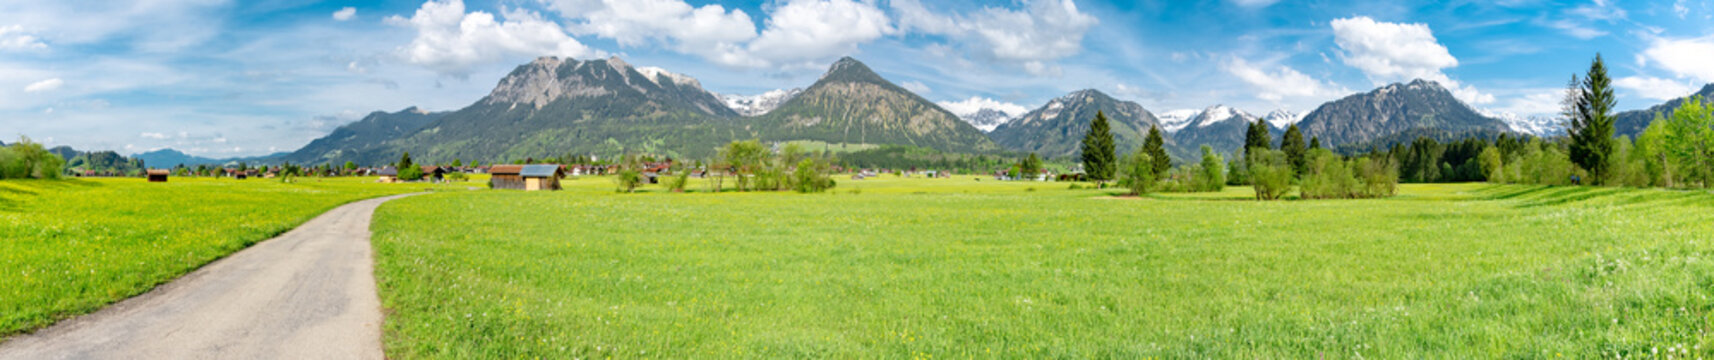 green landscape in the near of the alps - region oberstdorf, panorama